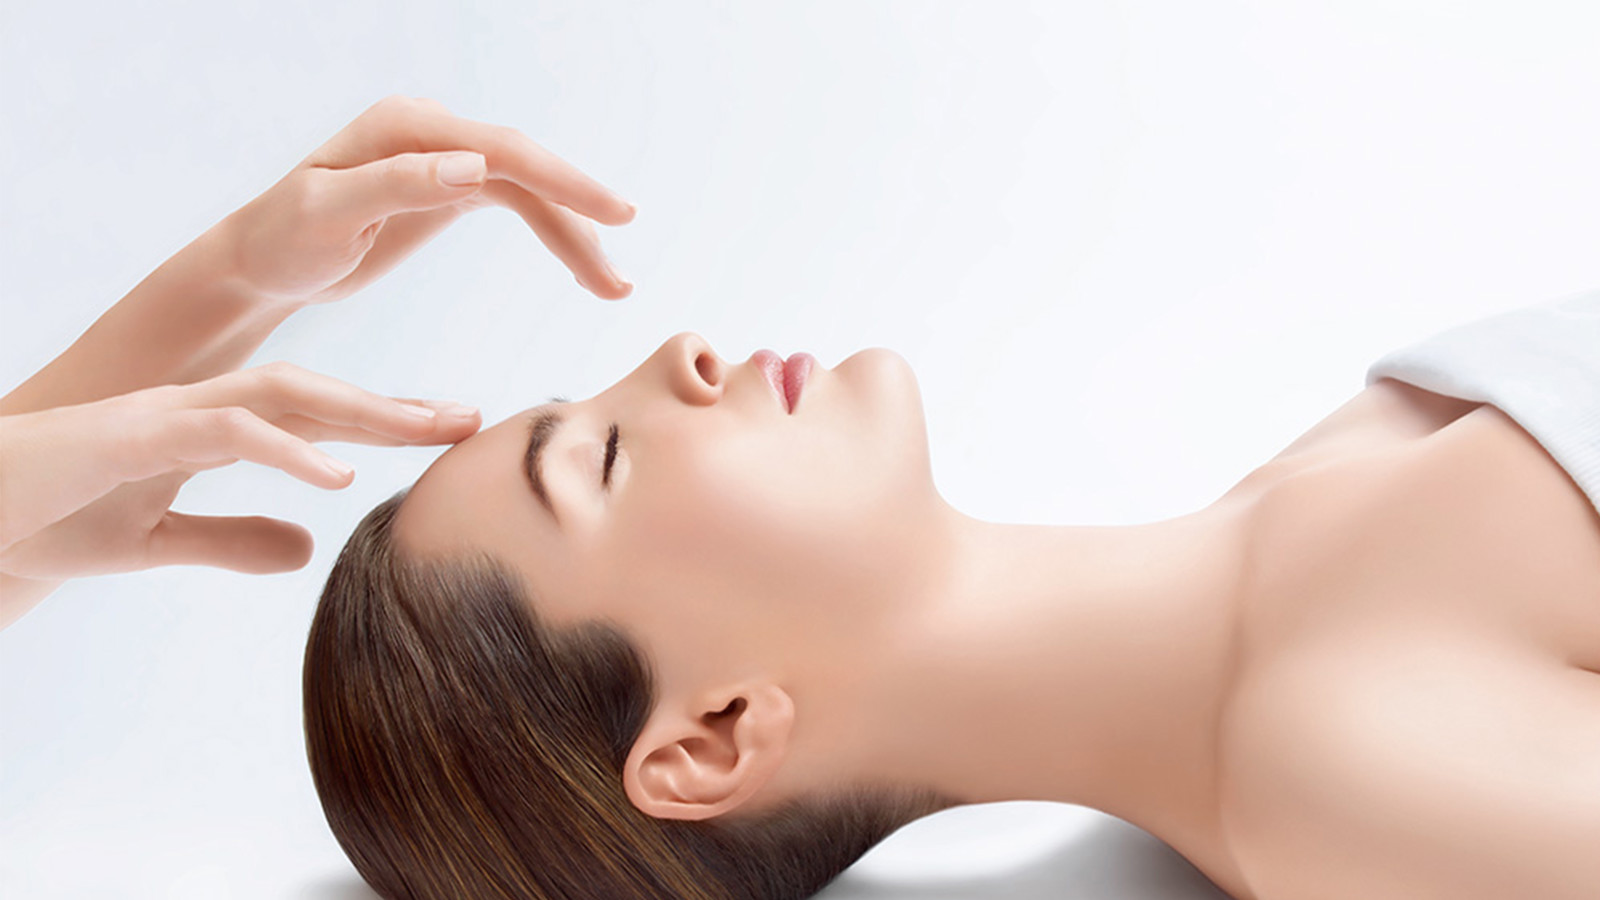 Woman with closed eyes getting a facial massage